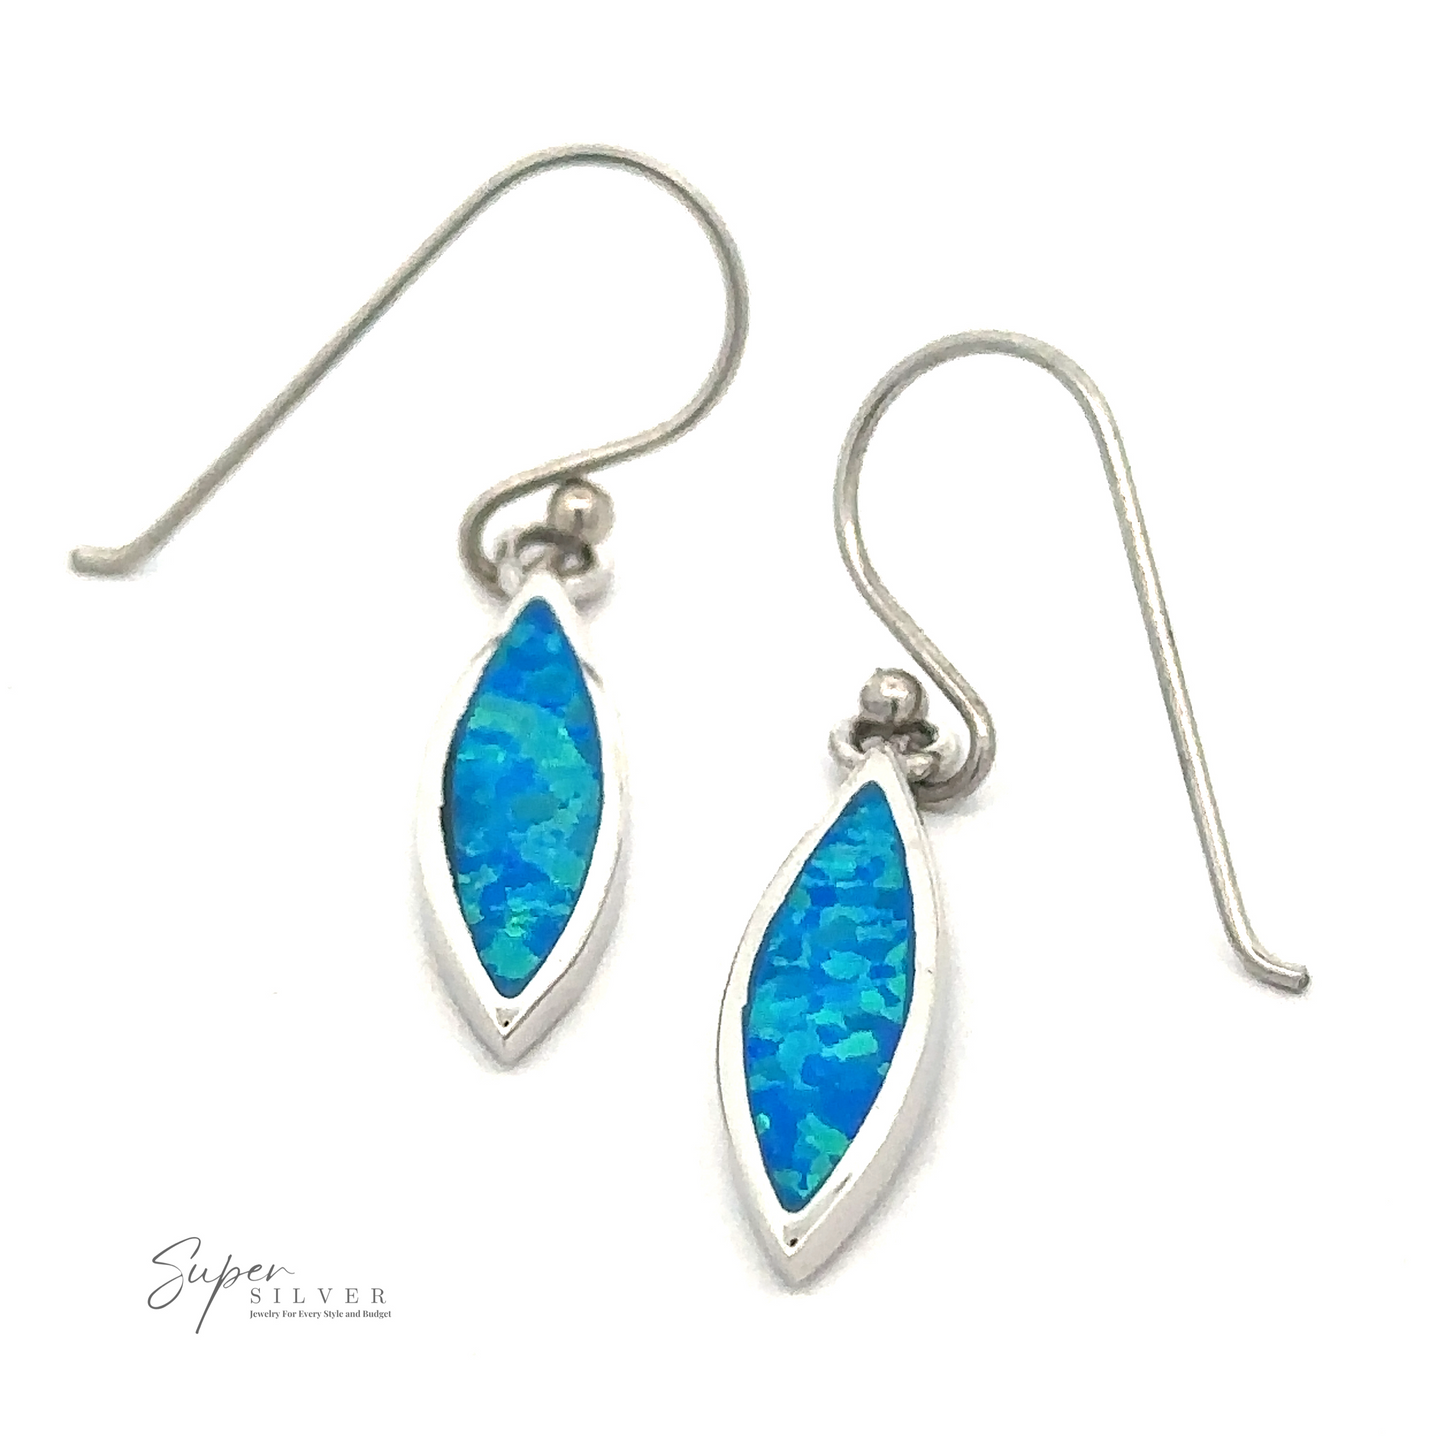 A pair of Lab-Created Opal Marquise Earrings. The created opal earrings feature hook-style fastenings.